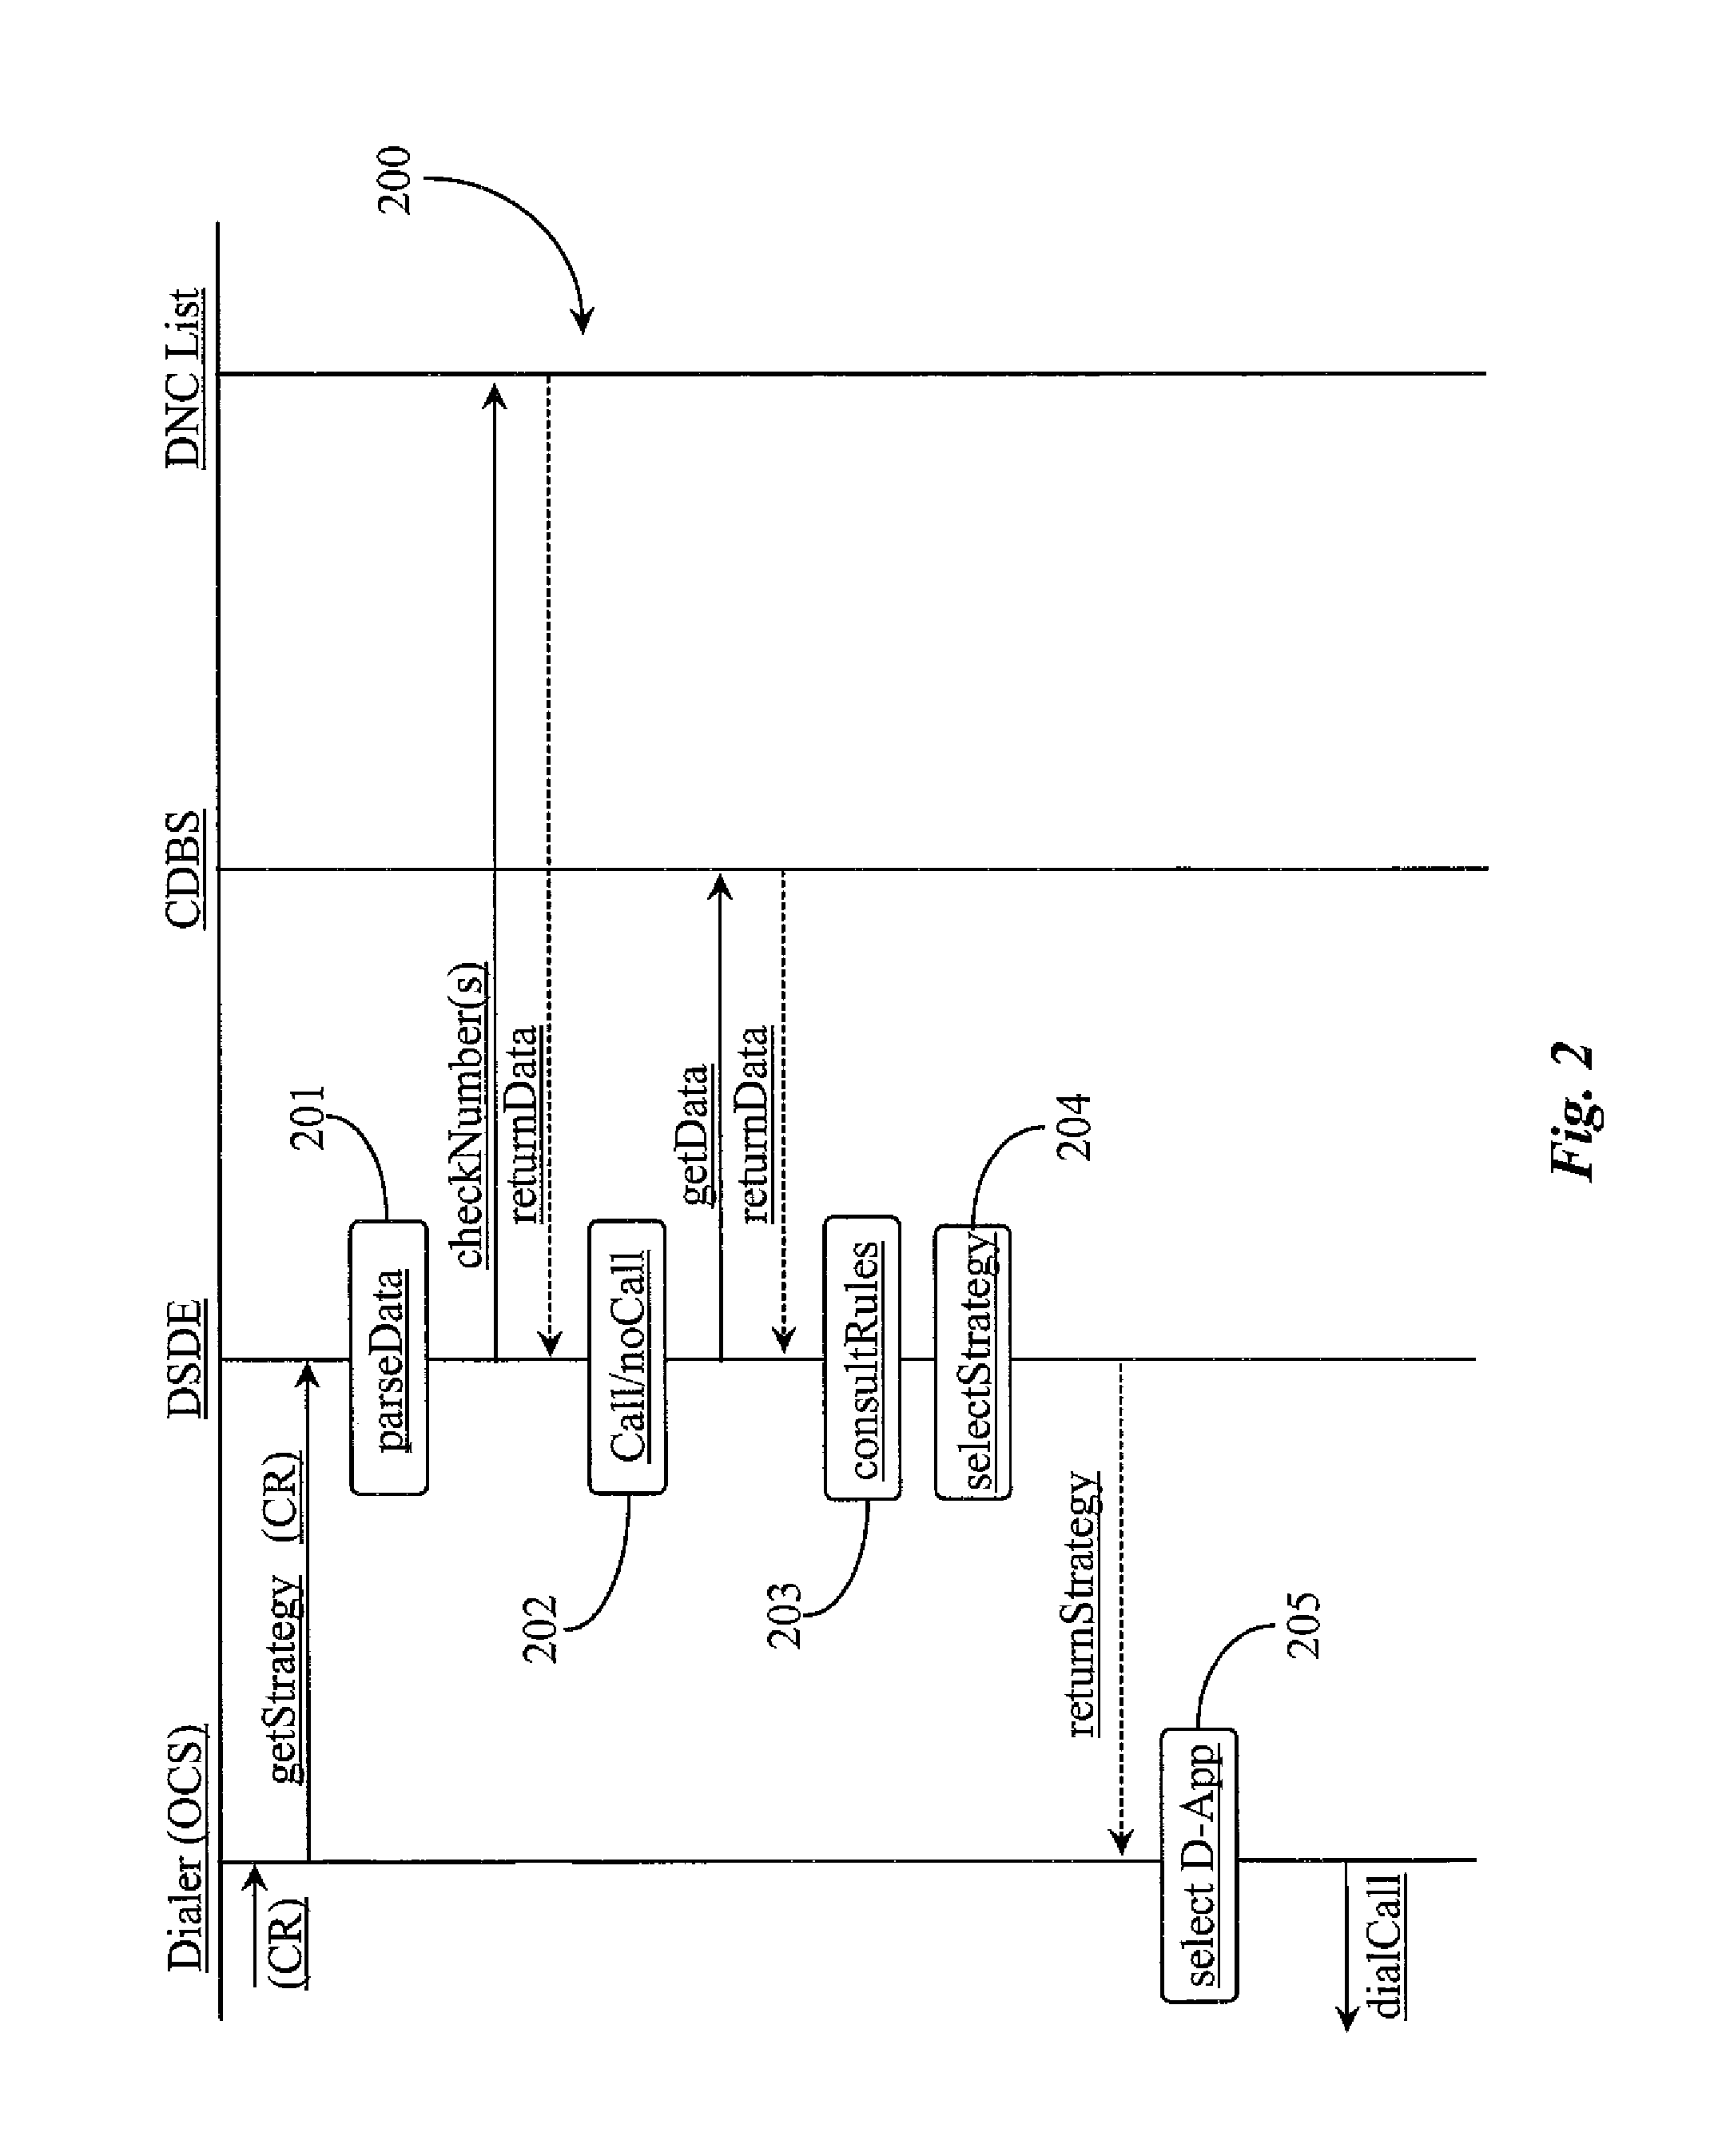 System and Methods for Selecting a Dialing Strategy for Placing an Outbound Call